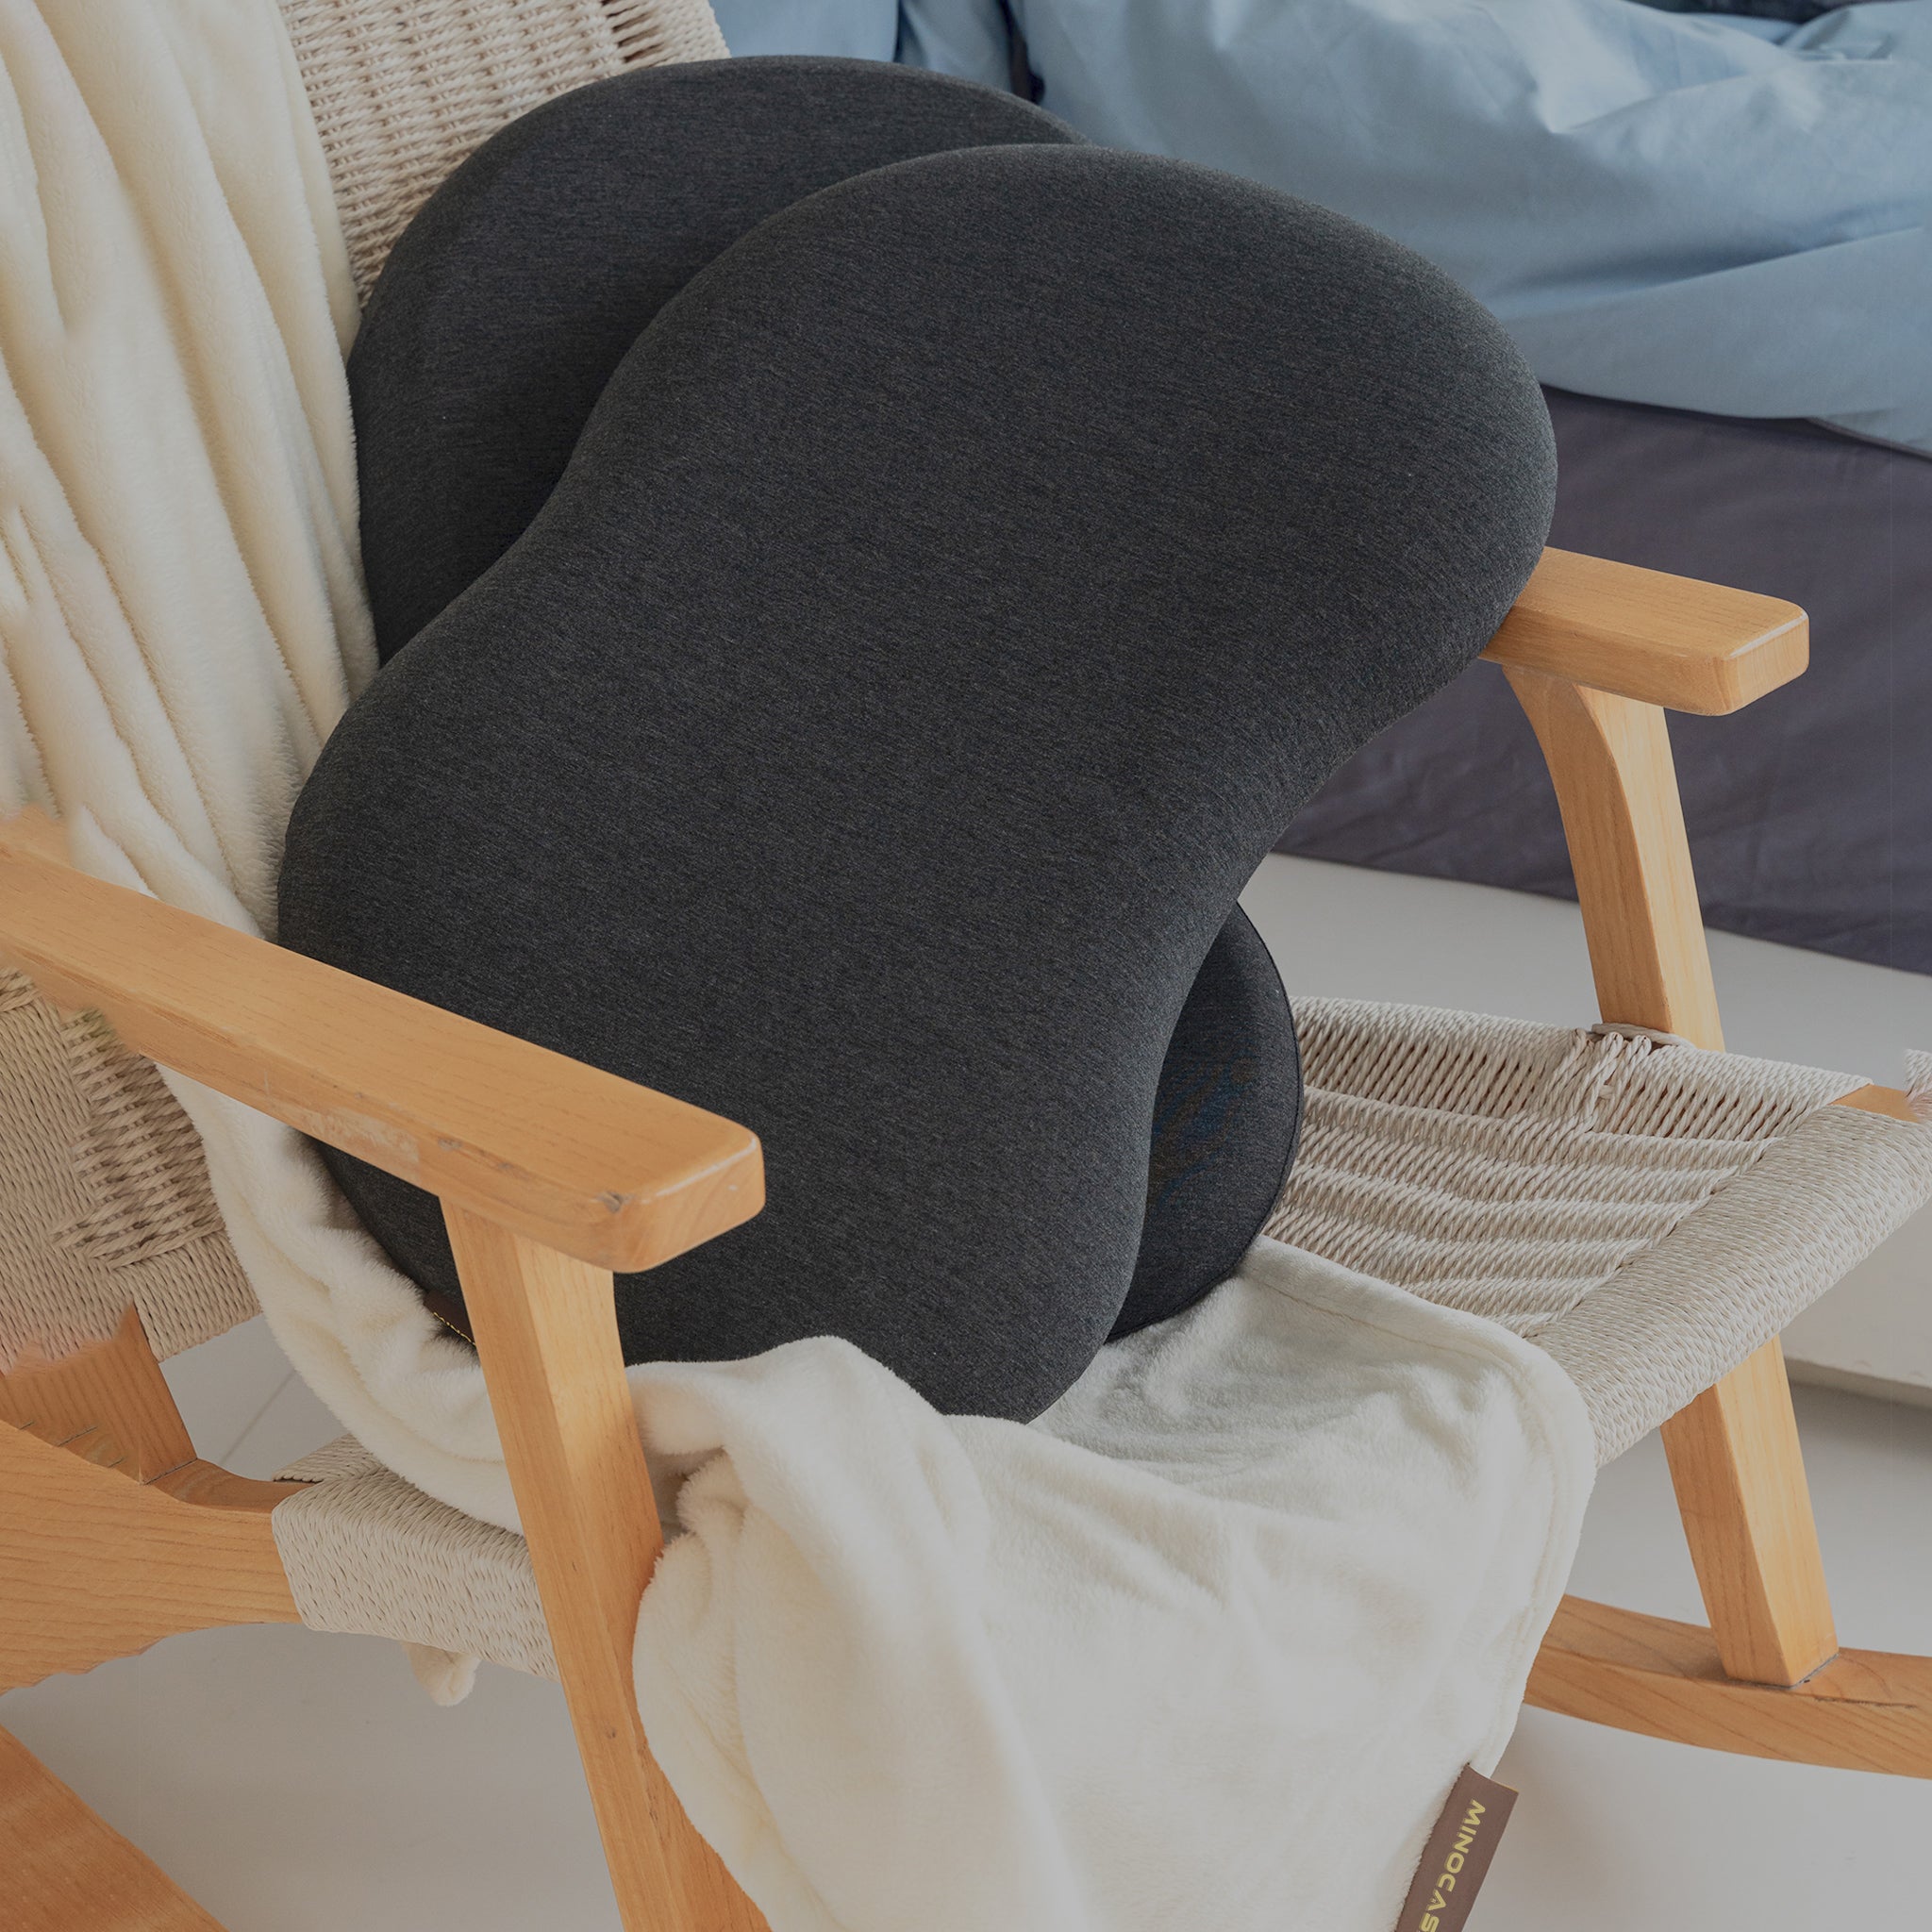 Minocasa Ergonomic and Orthopaedic Neck Supportive Pillows on Chair